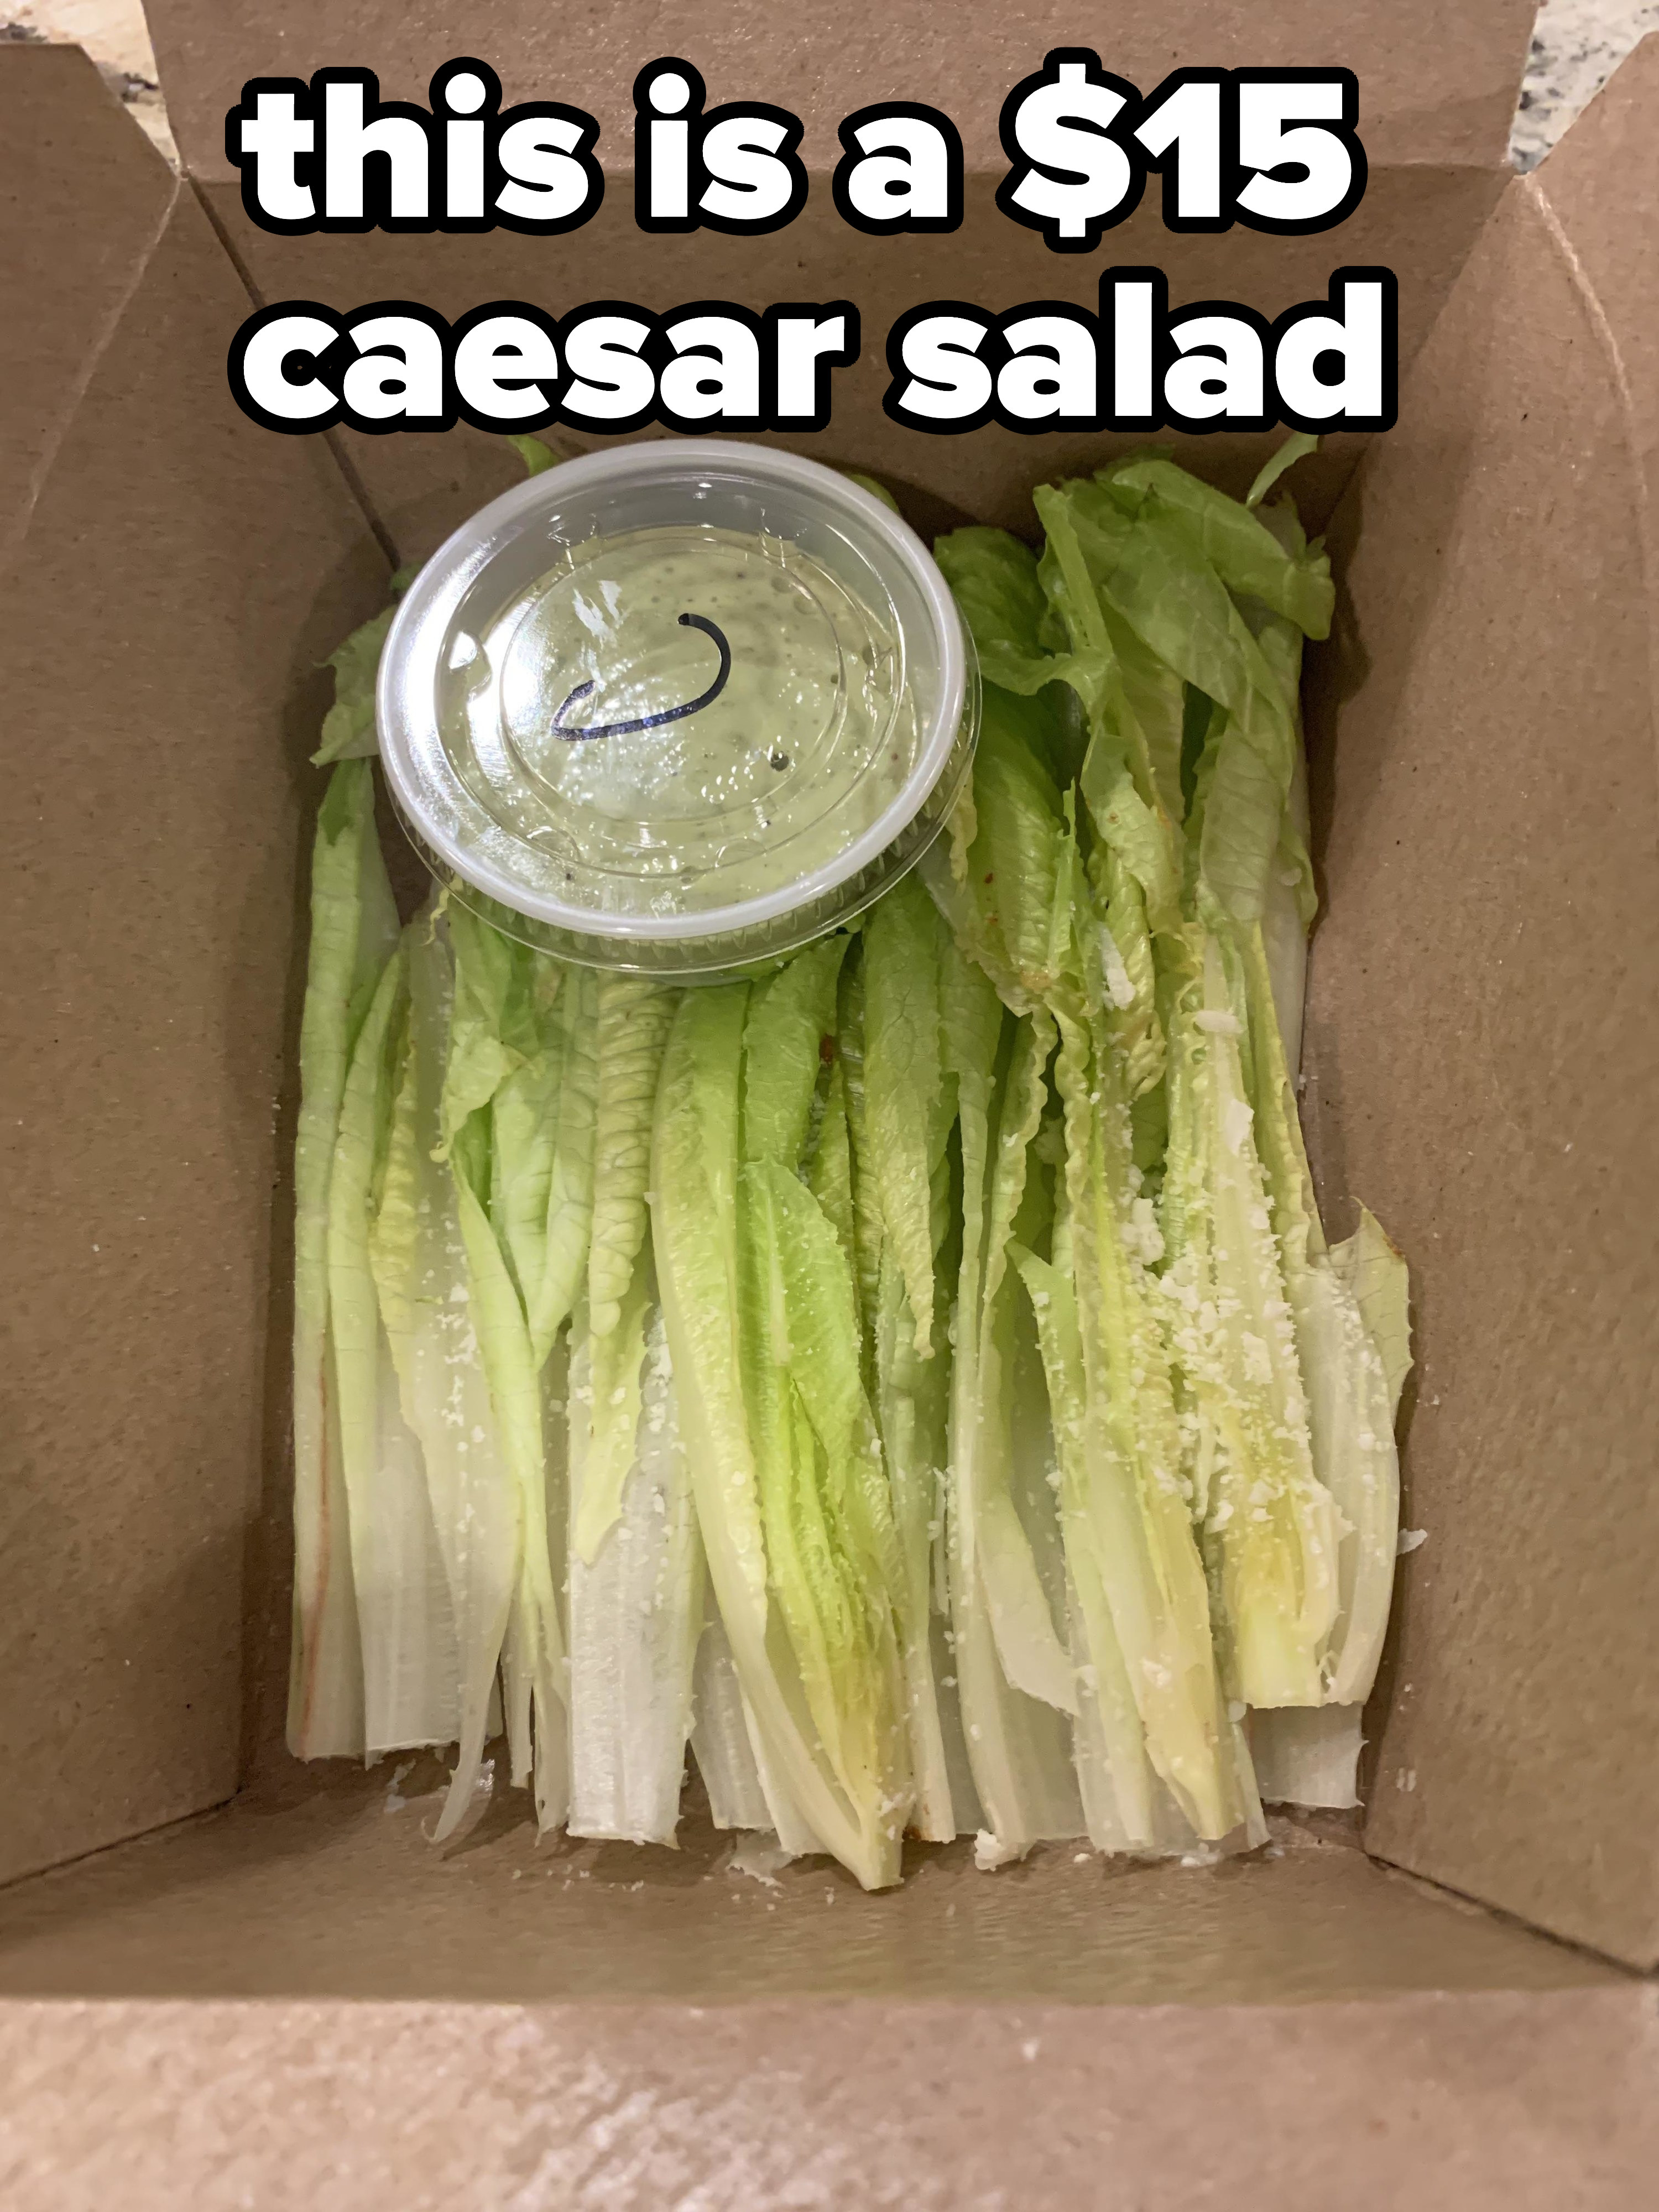 A salad consisting of whole romaine leaves and a tub of dressing